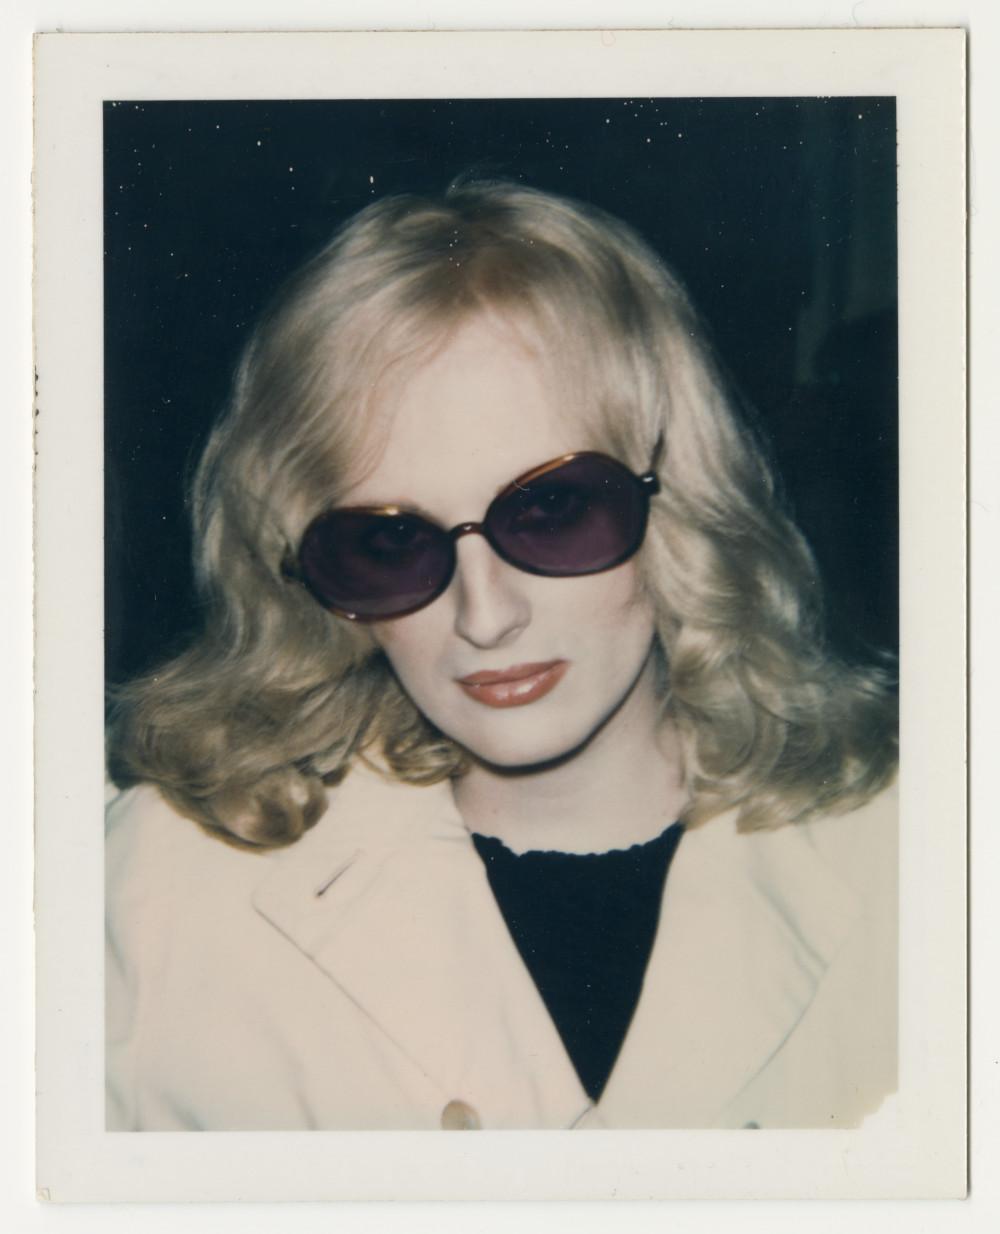 Andy Warhol Portrait Photograph – Candy Darling